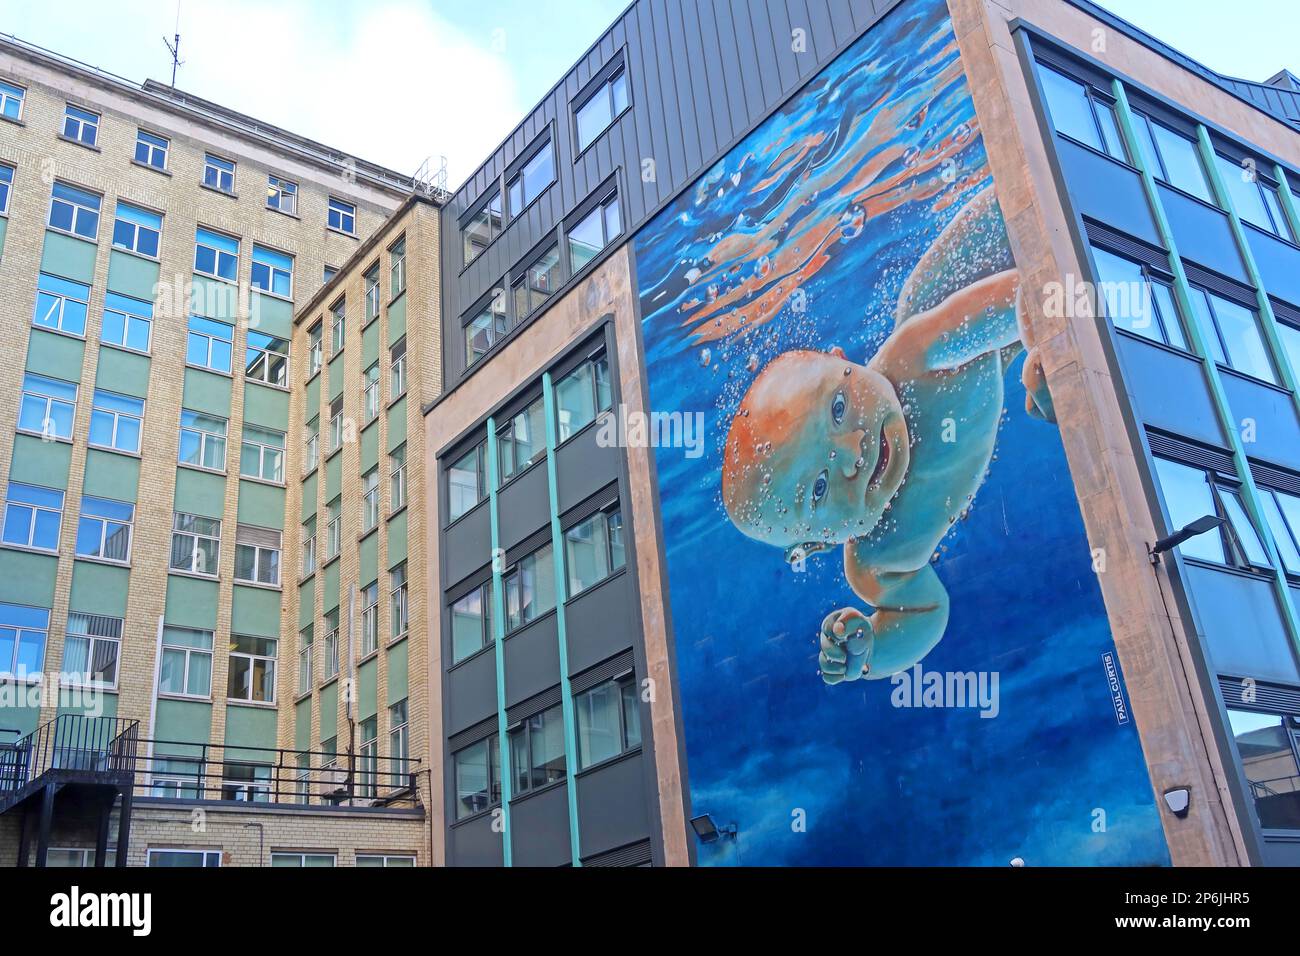 Artist Paul Curtis, painting of baby Ethan, swimming mural in Harrington St, Liverpool, Merseyside, England, UK, L2 9QF Stock Photo